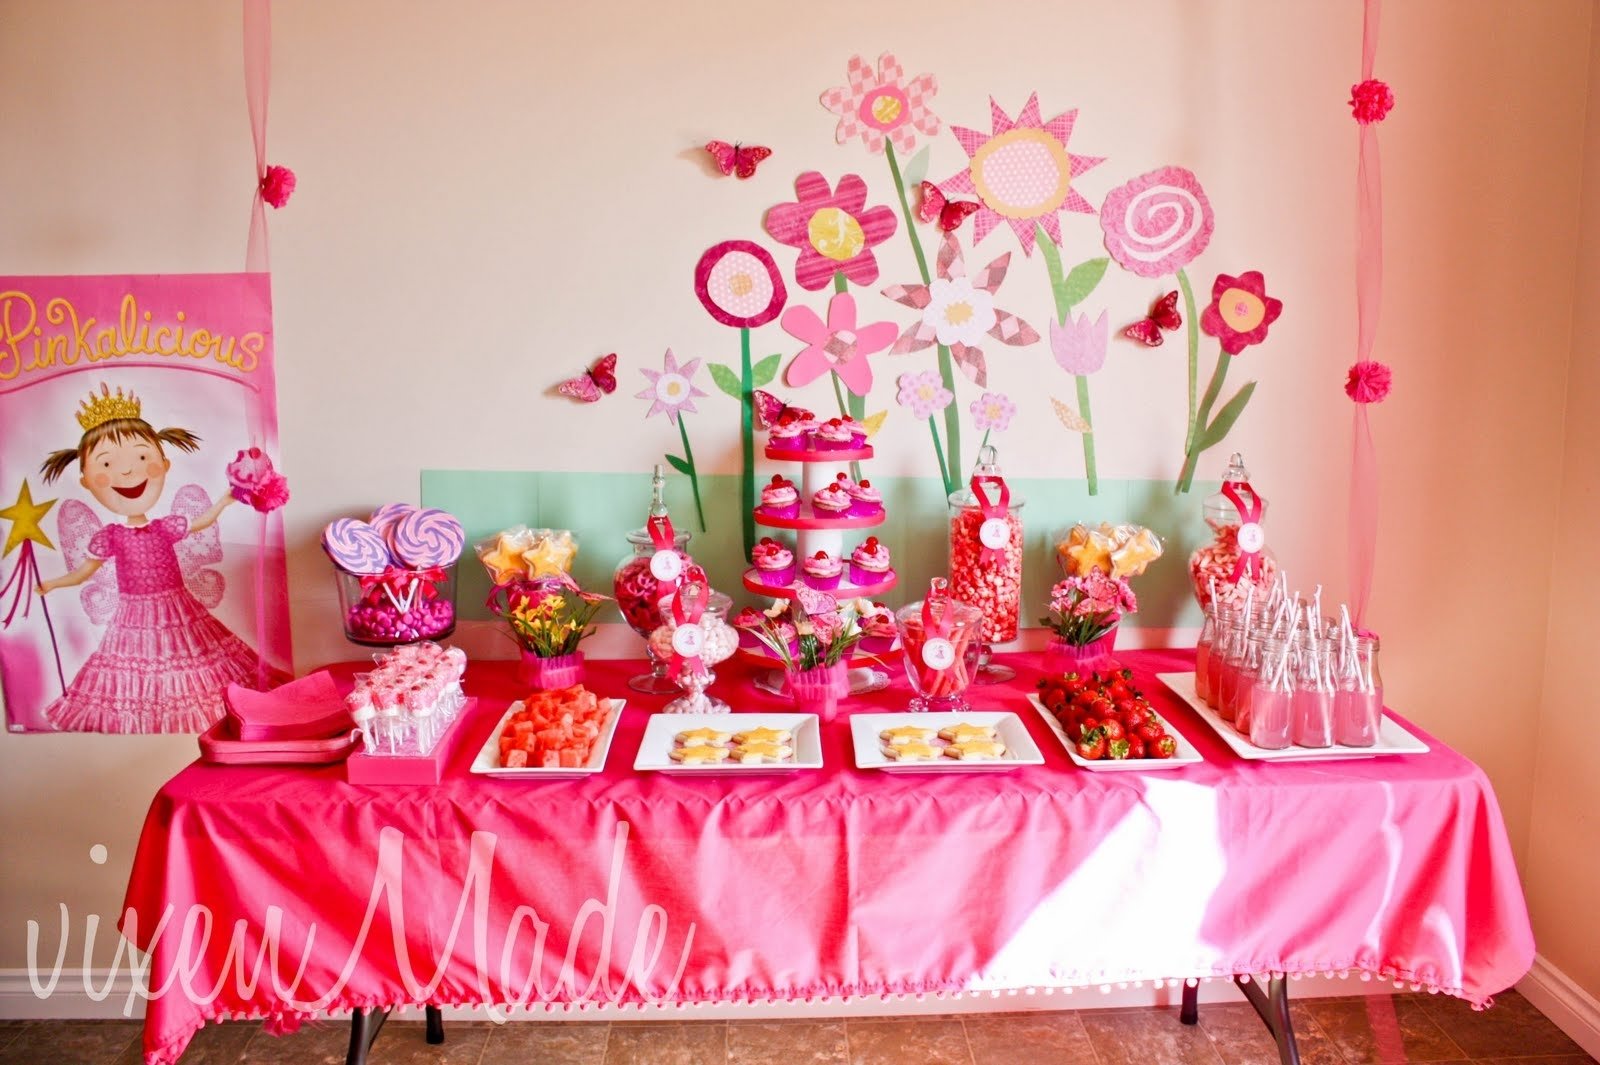 10 Most Popular Ideas For Girl Birthday Party 50 birthday party themes for girls i heart nap time 6 2022